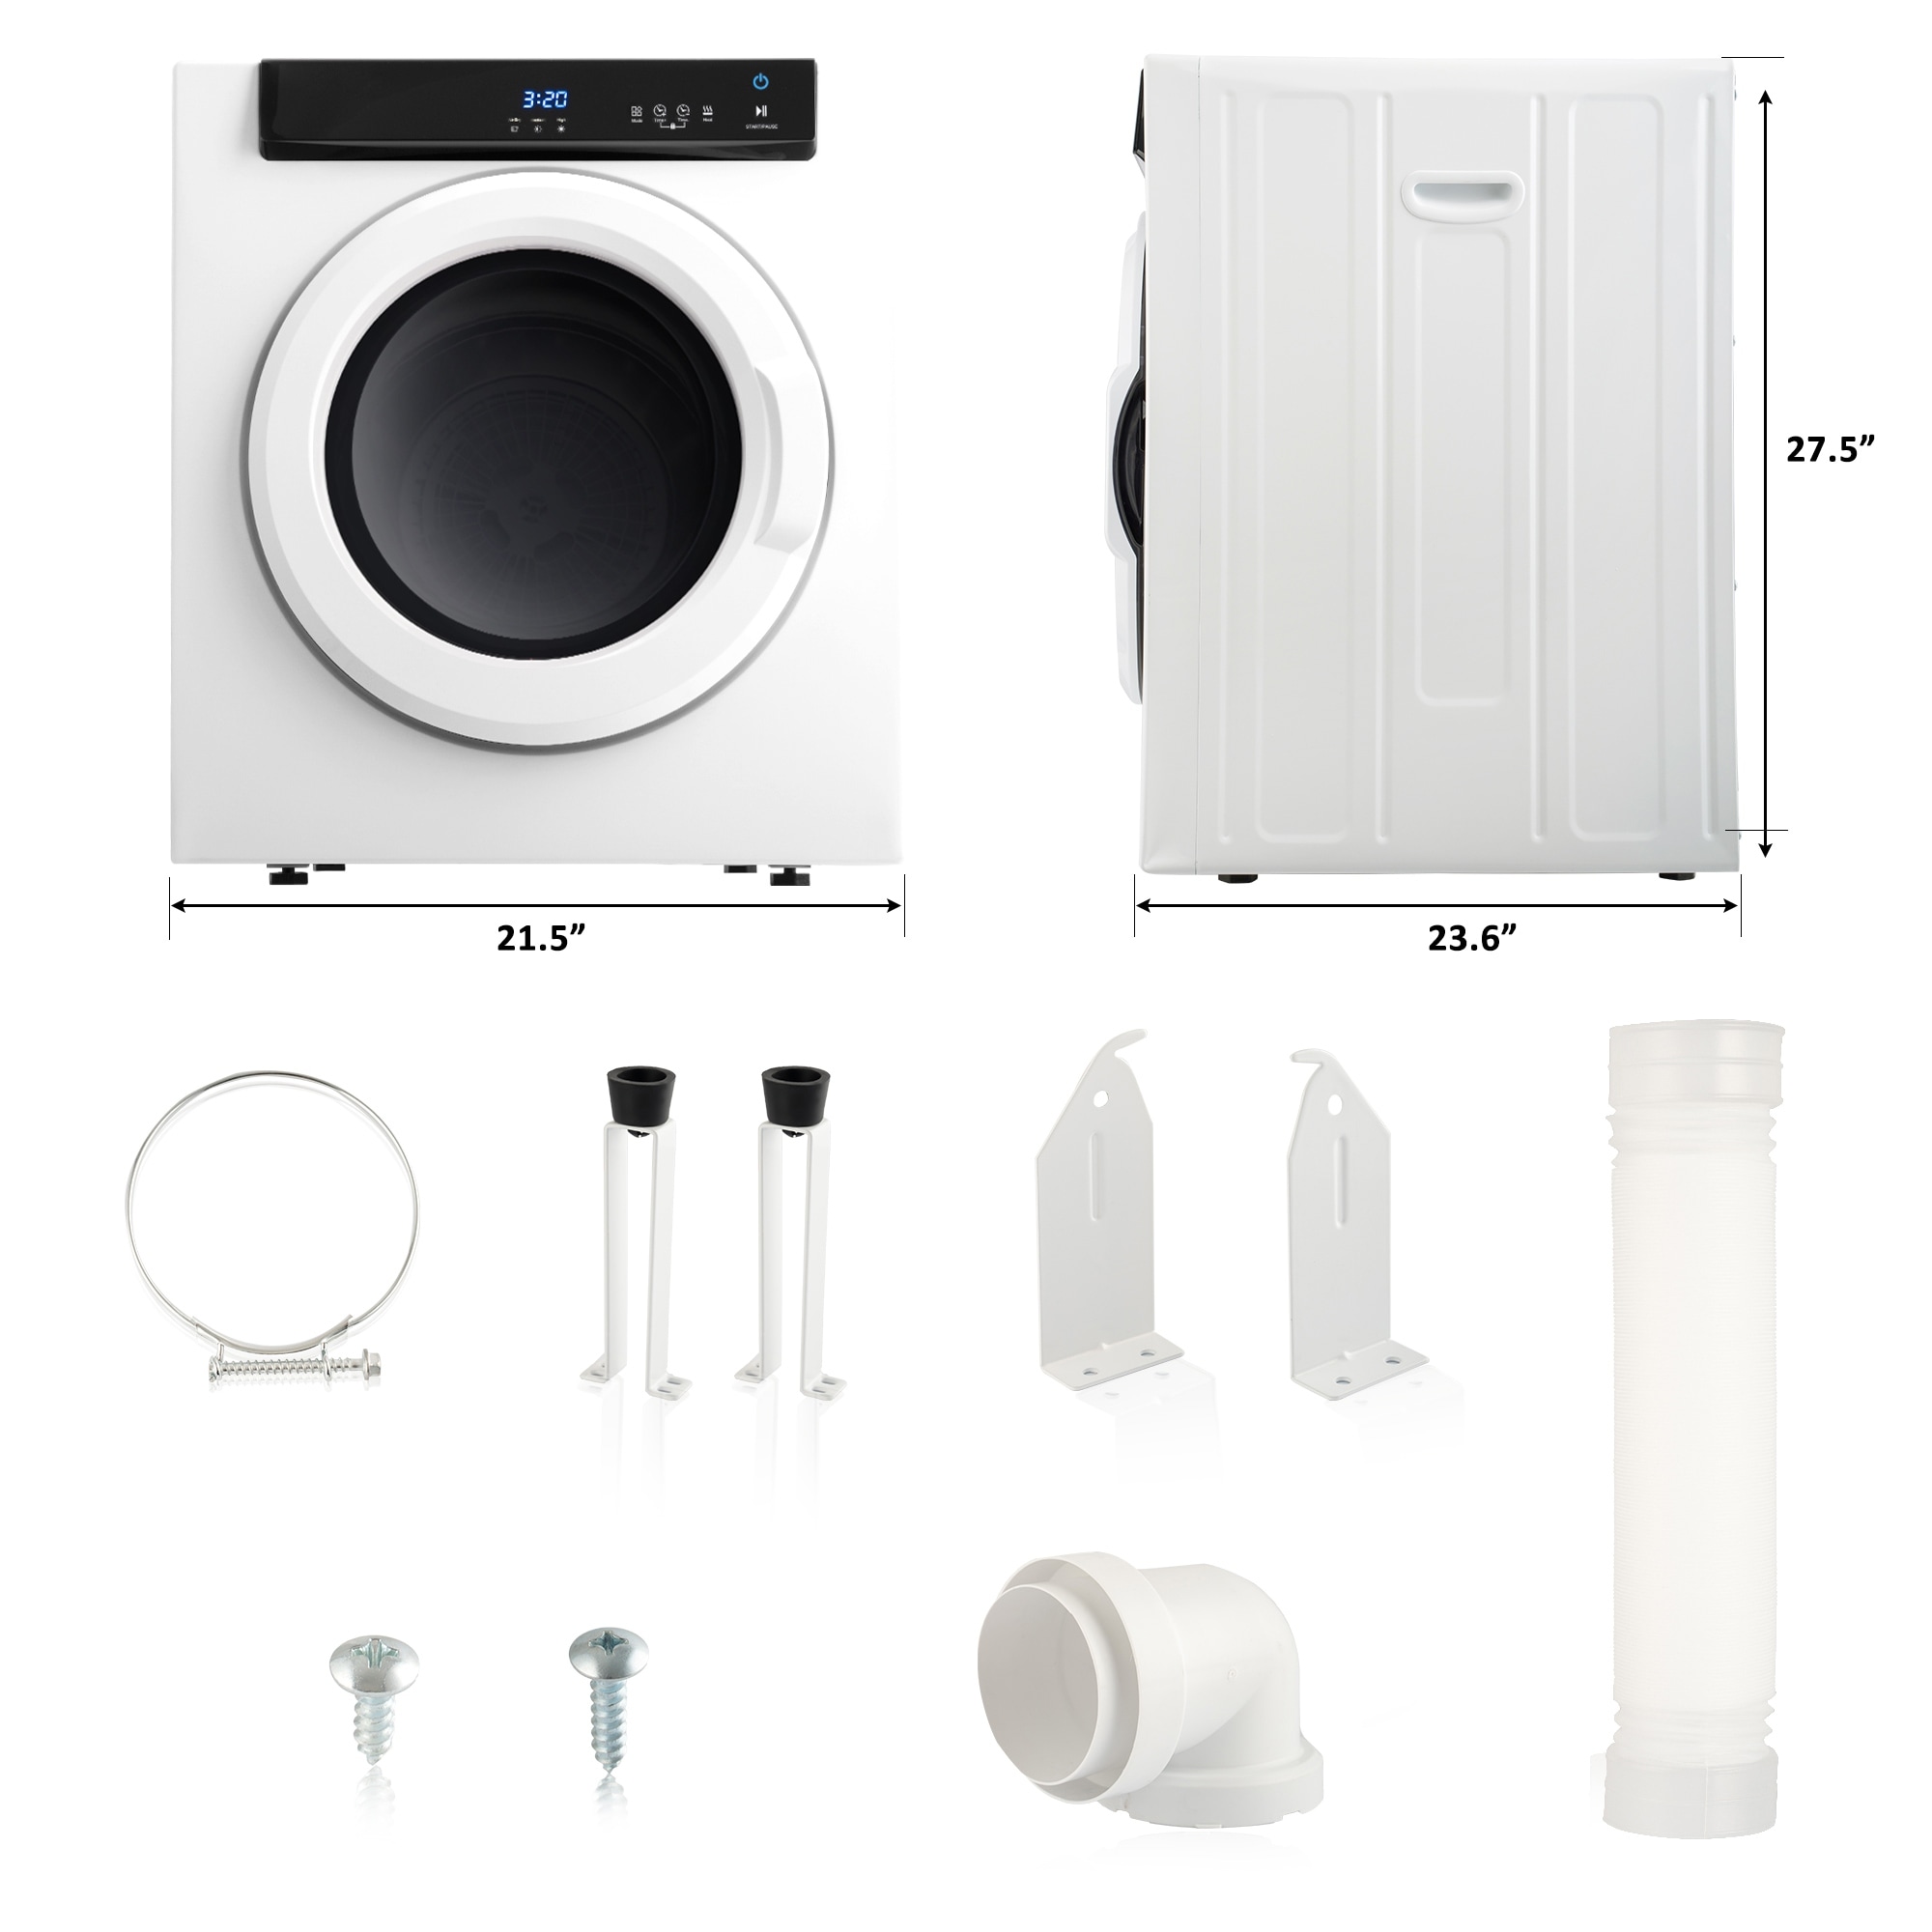 https://ak1.ostkcdn.com/images/products/is/images/direct/fdfba213f6f7da738c204aea610d6e1c0e9ba706/TiramisuBest-Electric-Portable-Clothes-Dryer-with-Touch-Screen-Panel.jpg